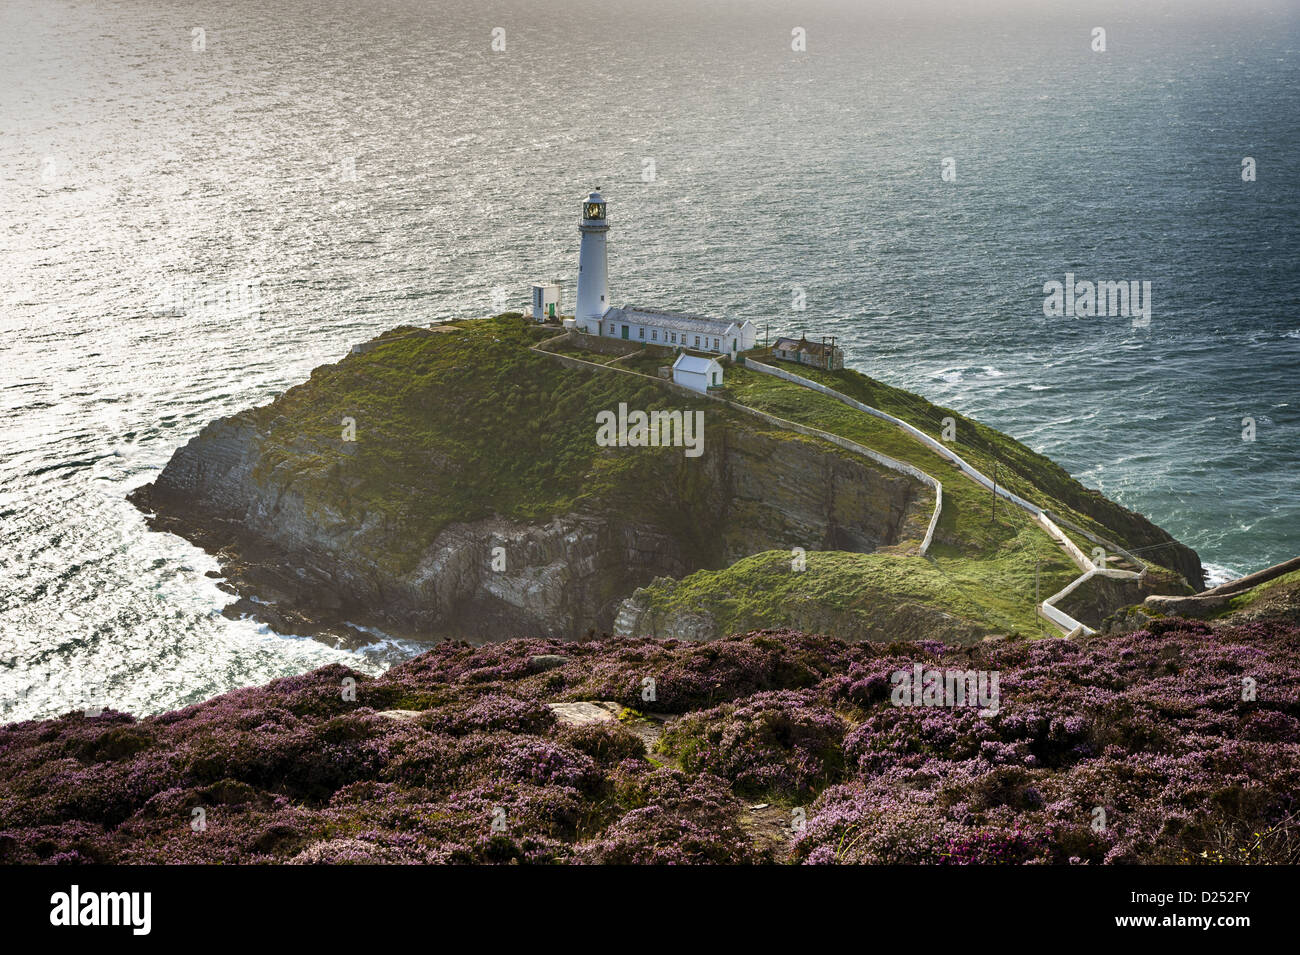 View of coastline and lighthouse, South Stack Lighthouse, Holyhead, Holy Island, Anglesey, Wales, August Stock Photo